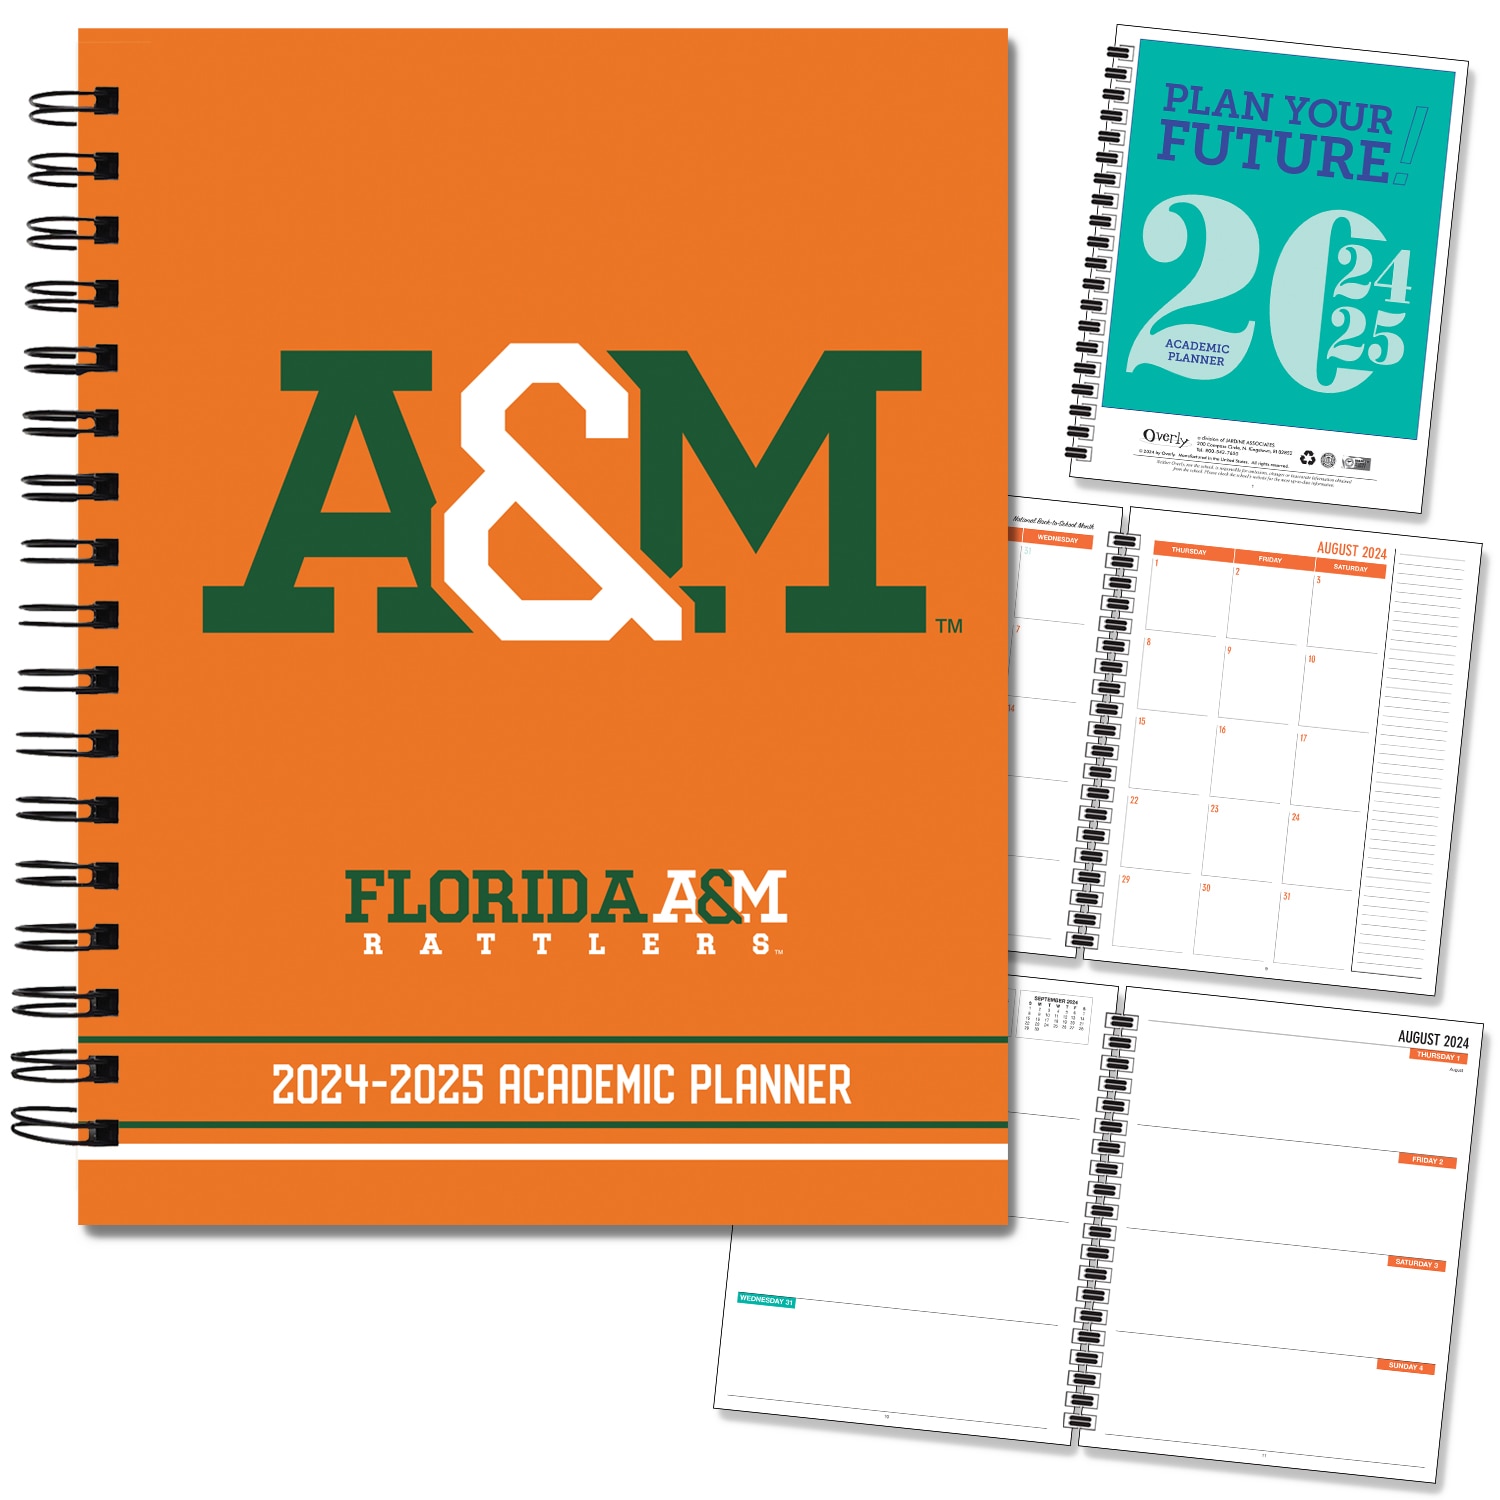 FY 25 Traditional Mascot Hard Cover Imprinted Planner 24-25 AY 7x9